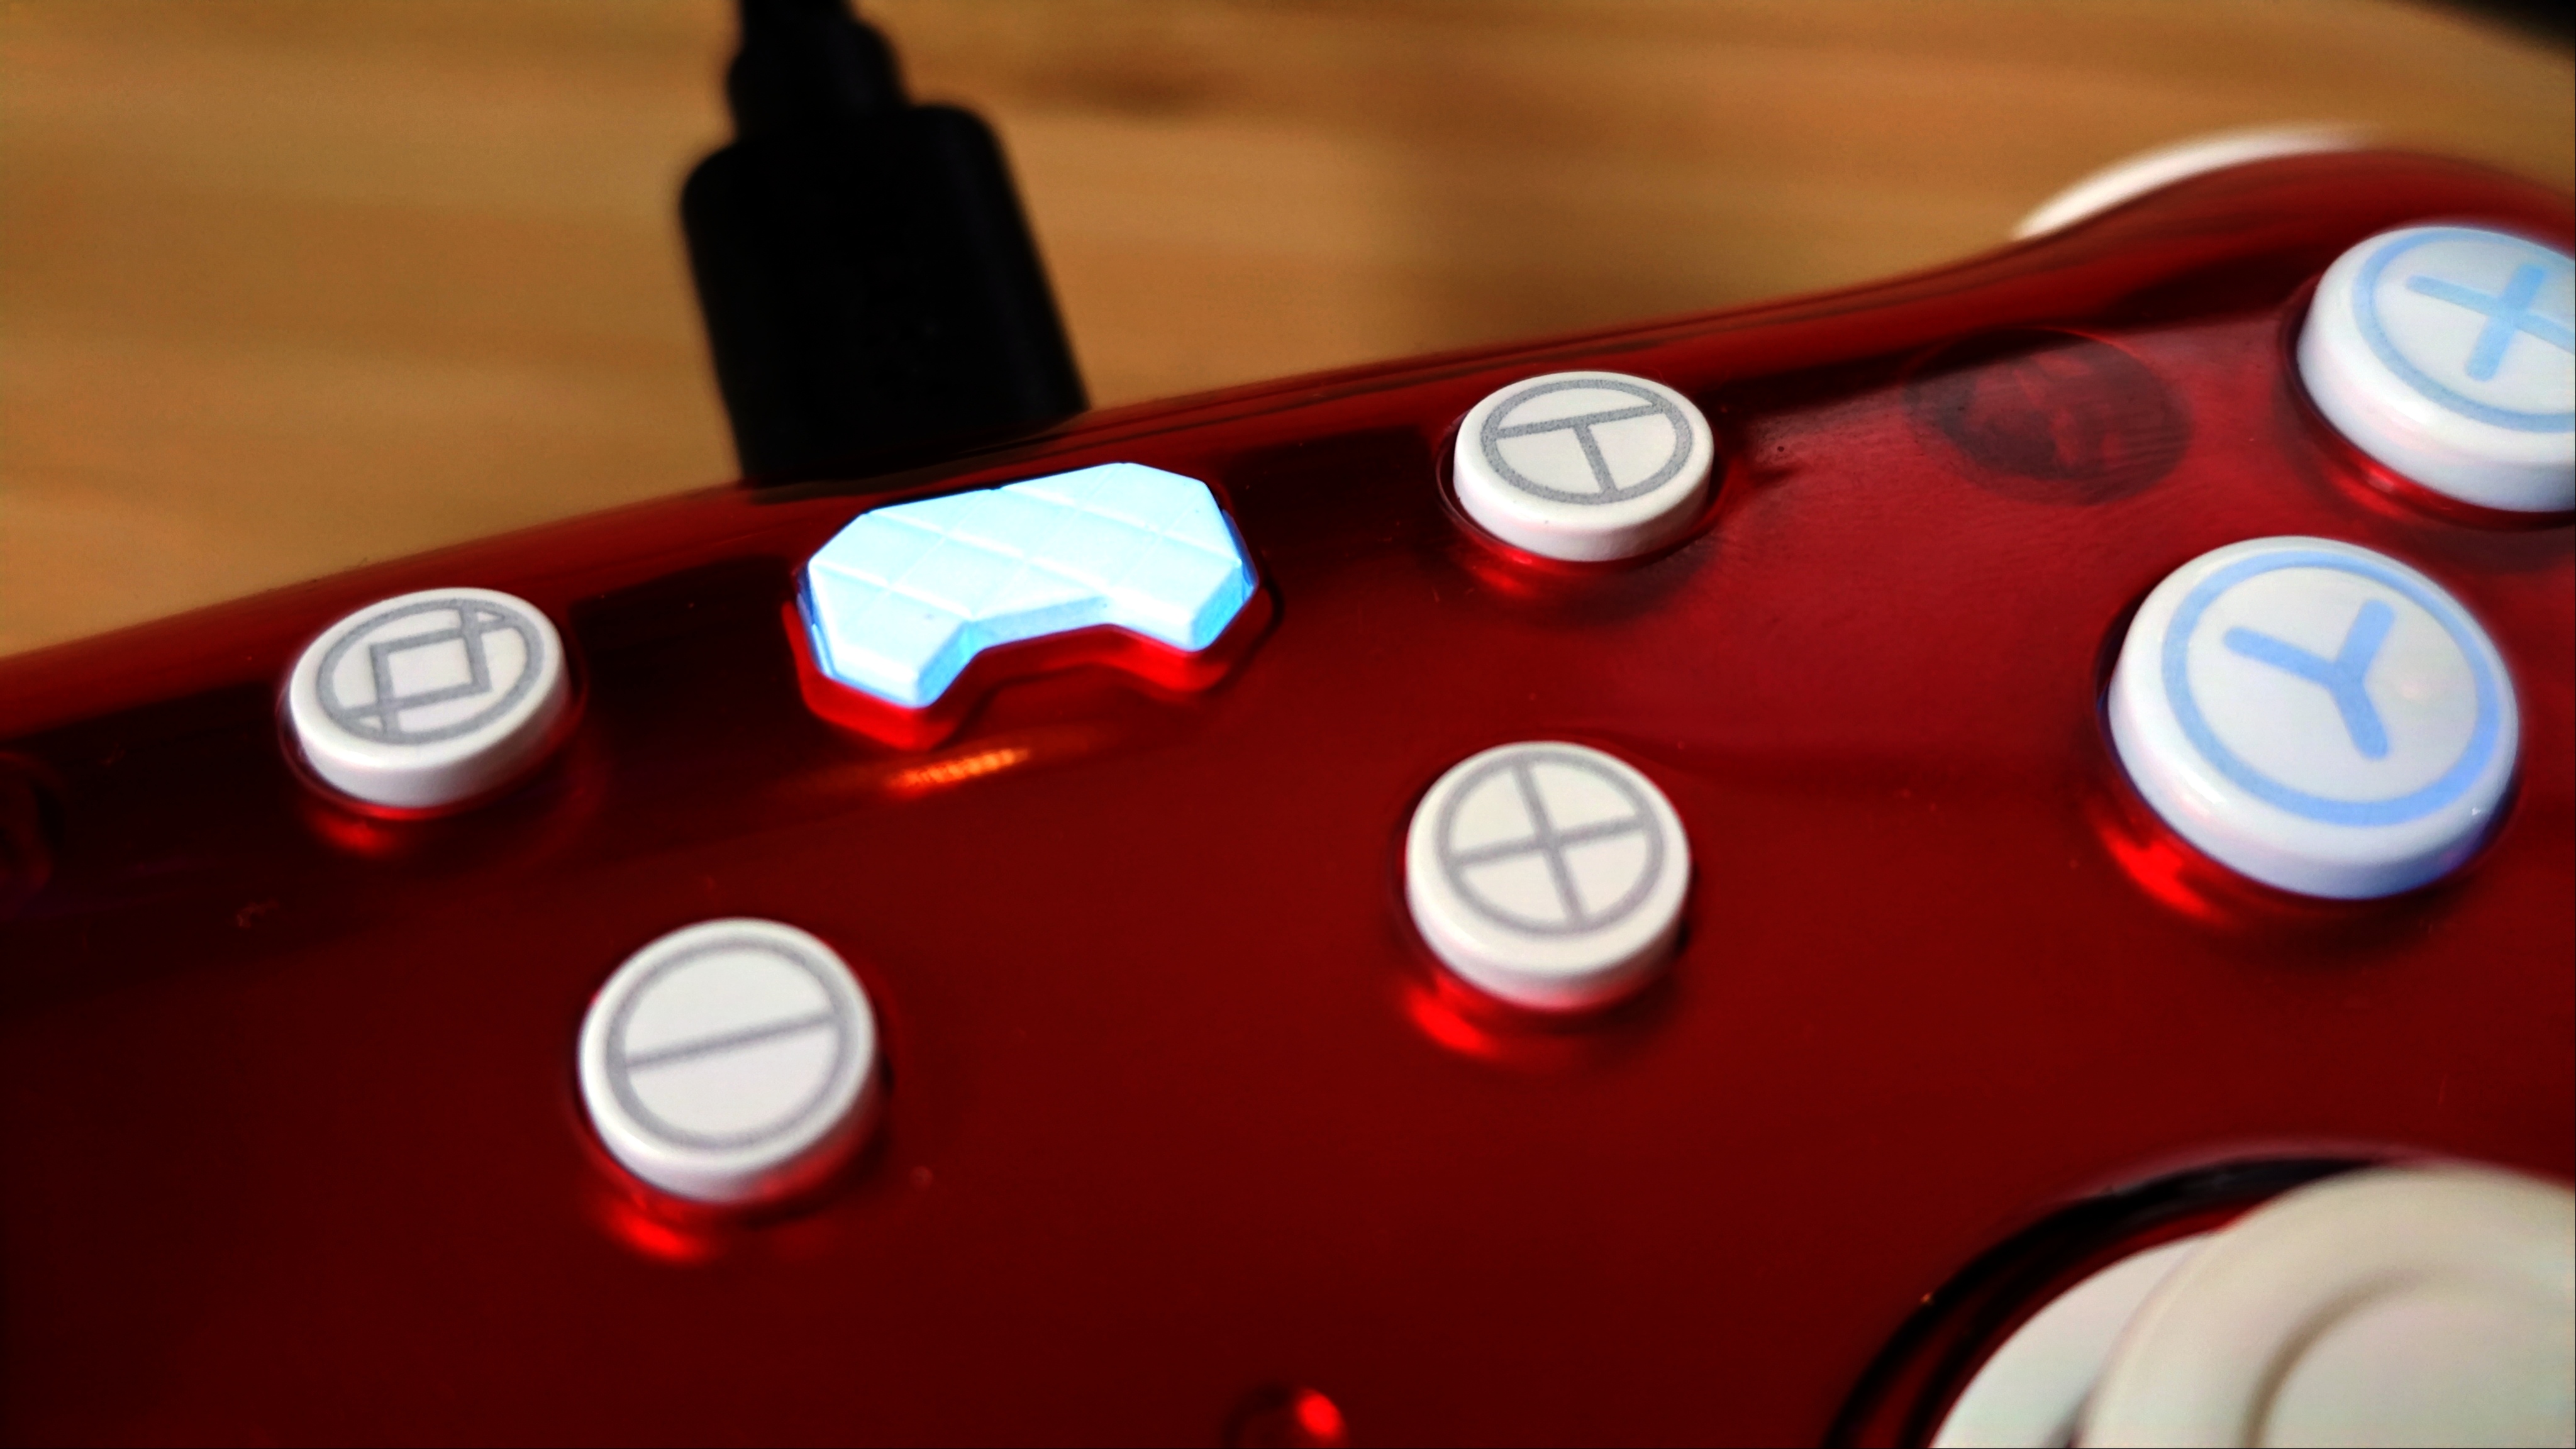 A Ruby red PB Tails gaming controller sitting on a wooden desk